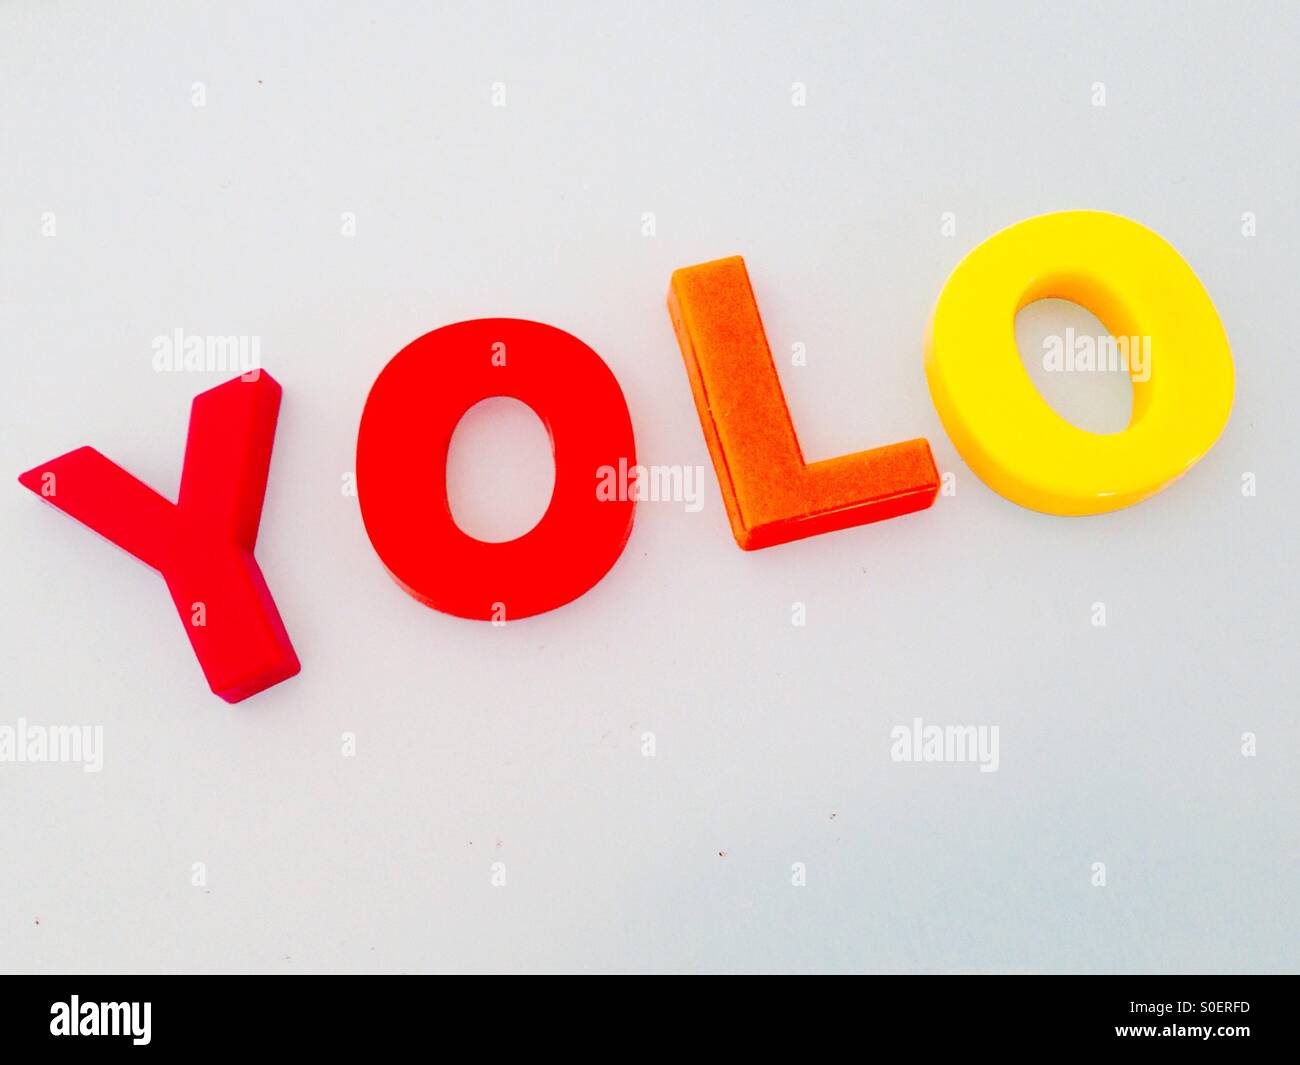 You only live once Stock Photo